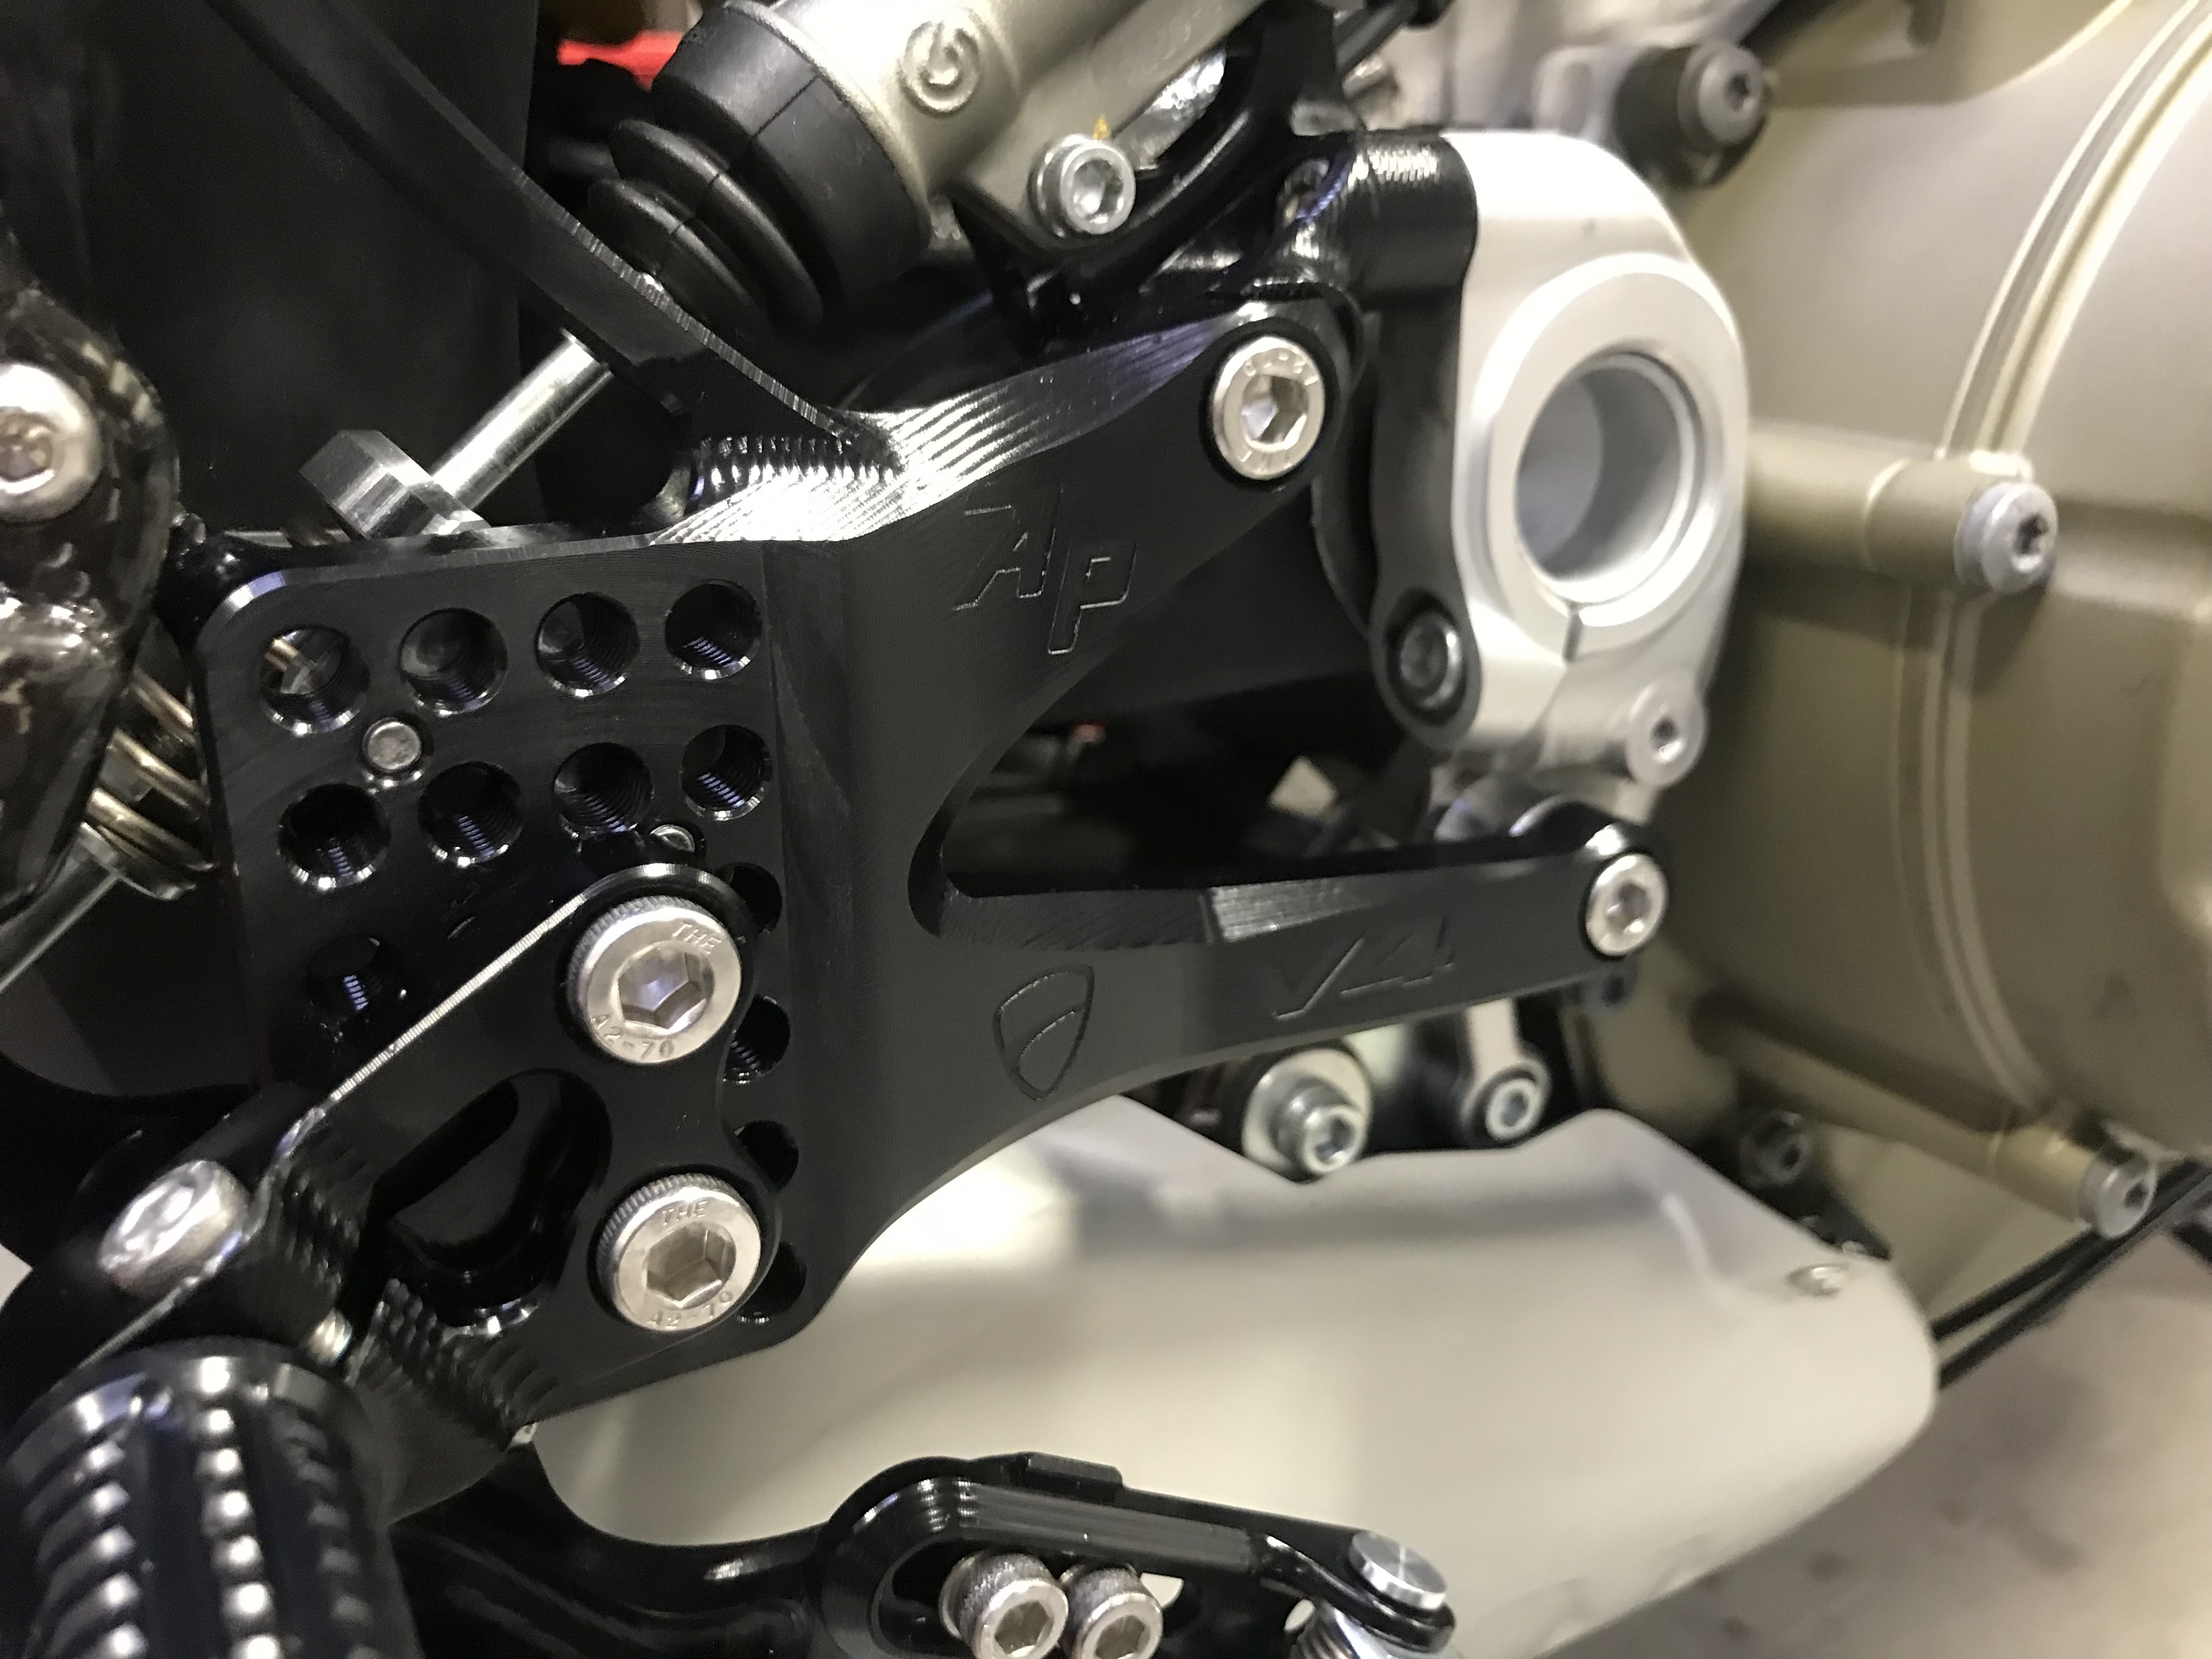 Attack Performance Billet Aluminum Adustable Rearsets for Ducati V4 Panigale